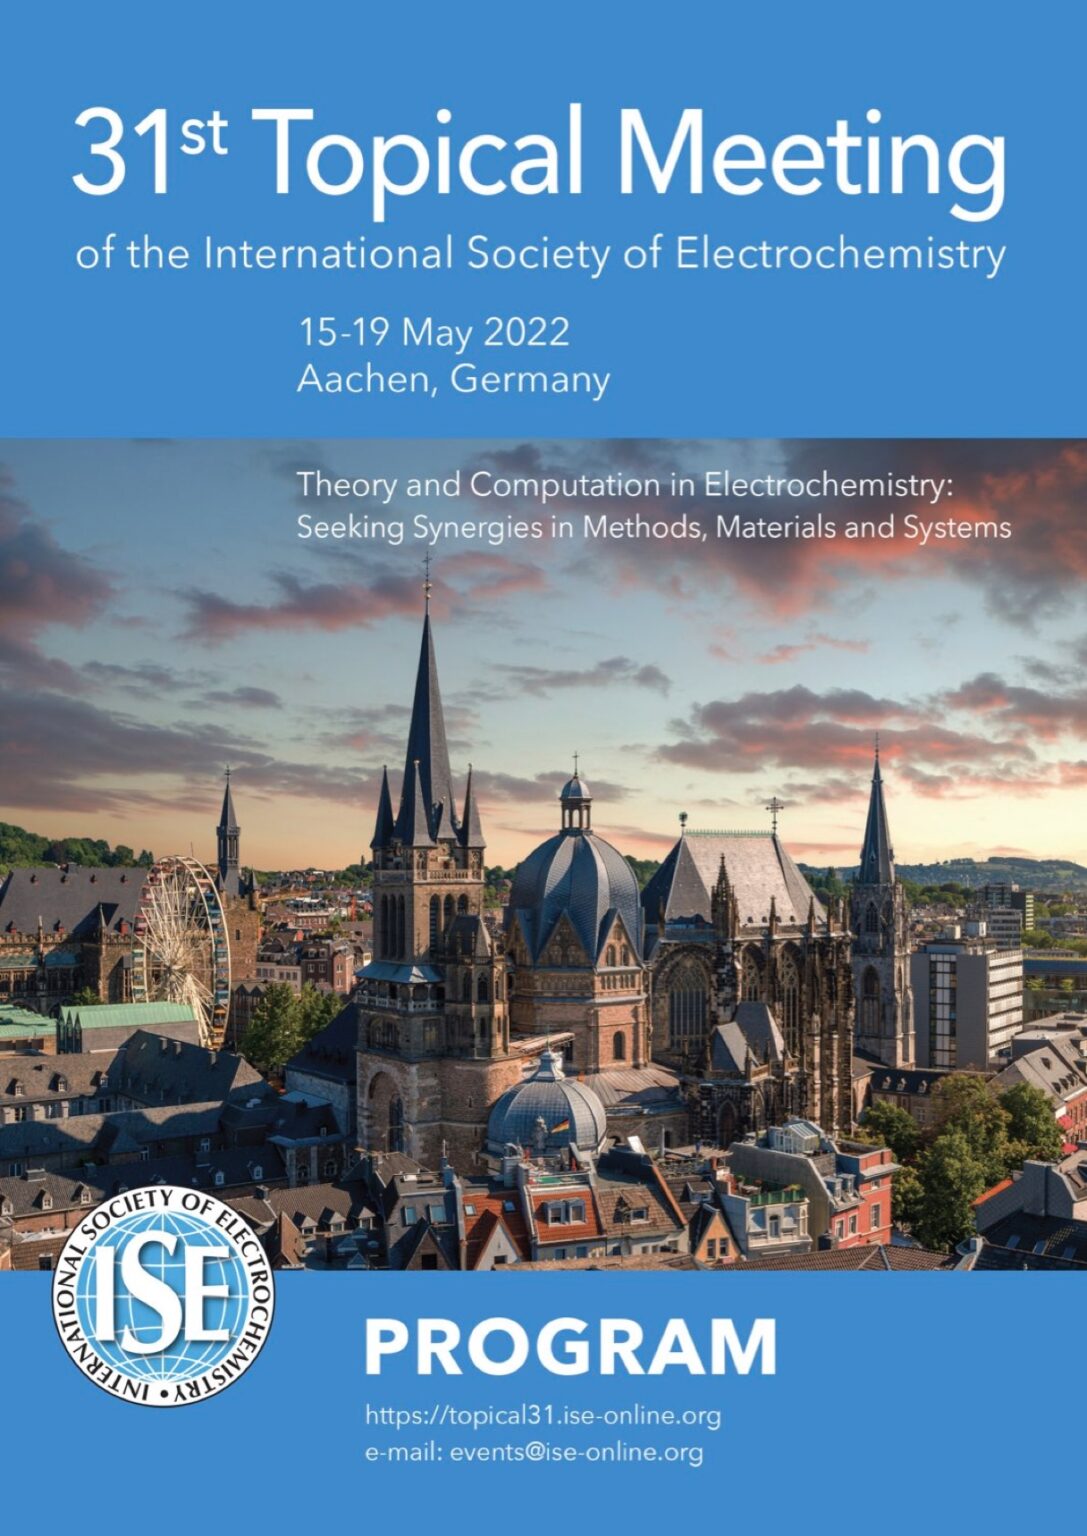 31st Topical Meeting of the International Society of Electrochemistry